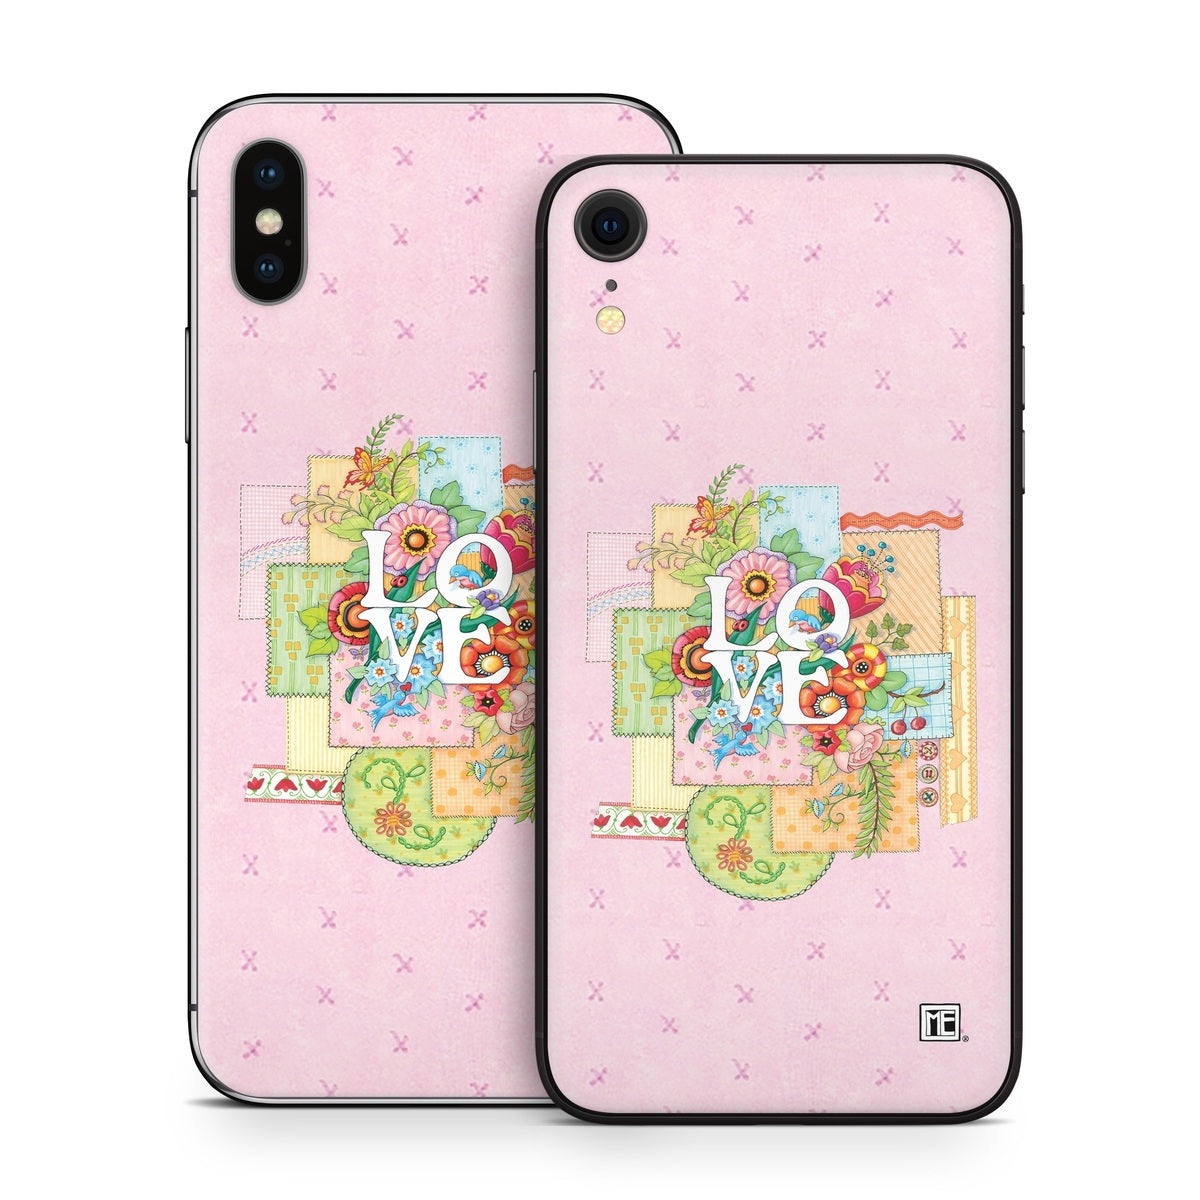 Love And Stitches - Apple iPhone X Skin